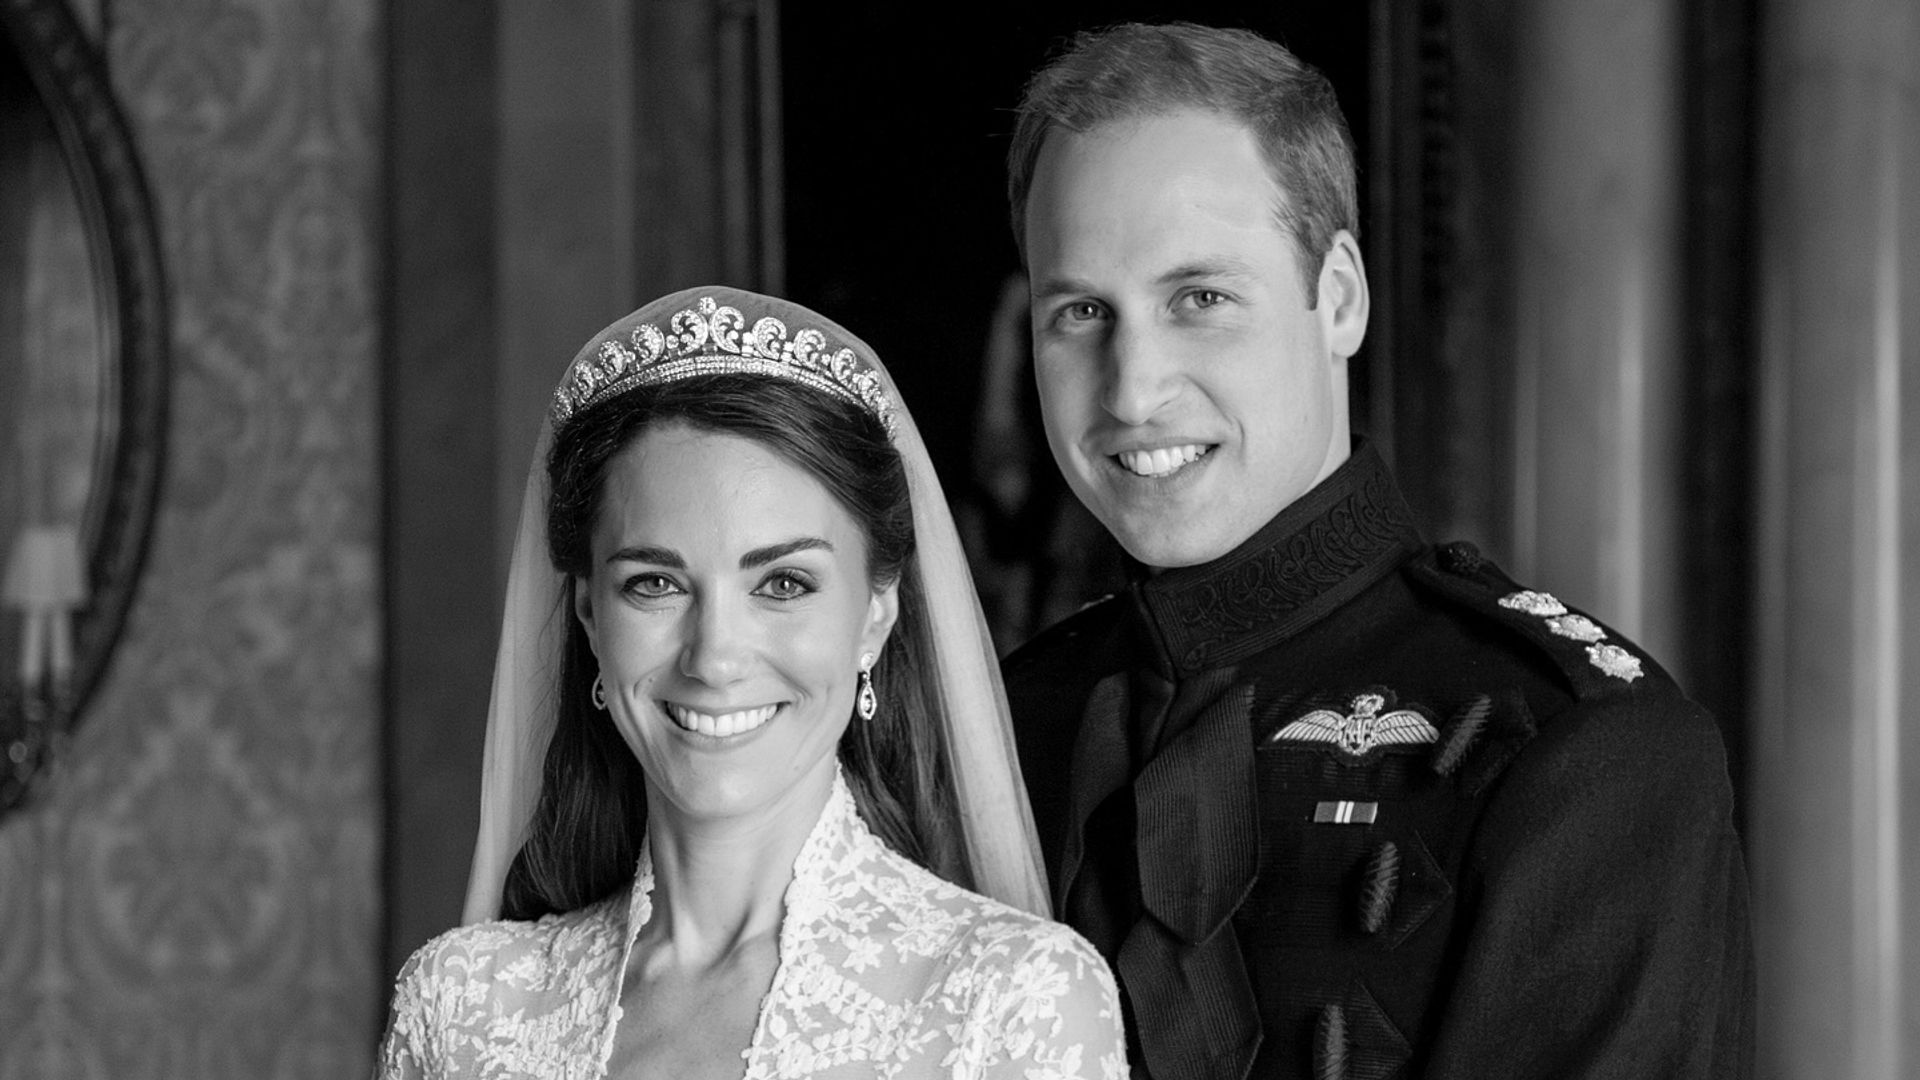 Prince William and Princess Kate share previously unseen wedding photo to celebrate anniversary